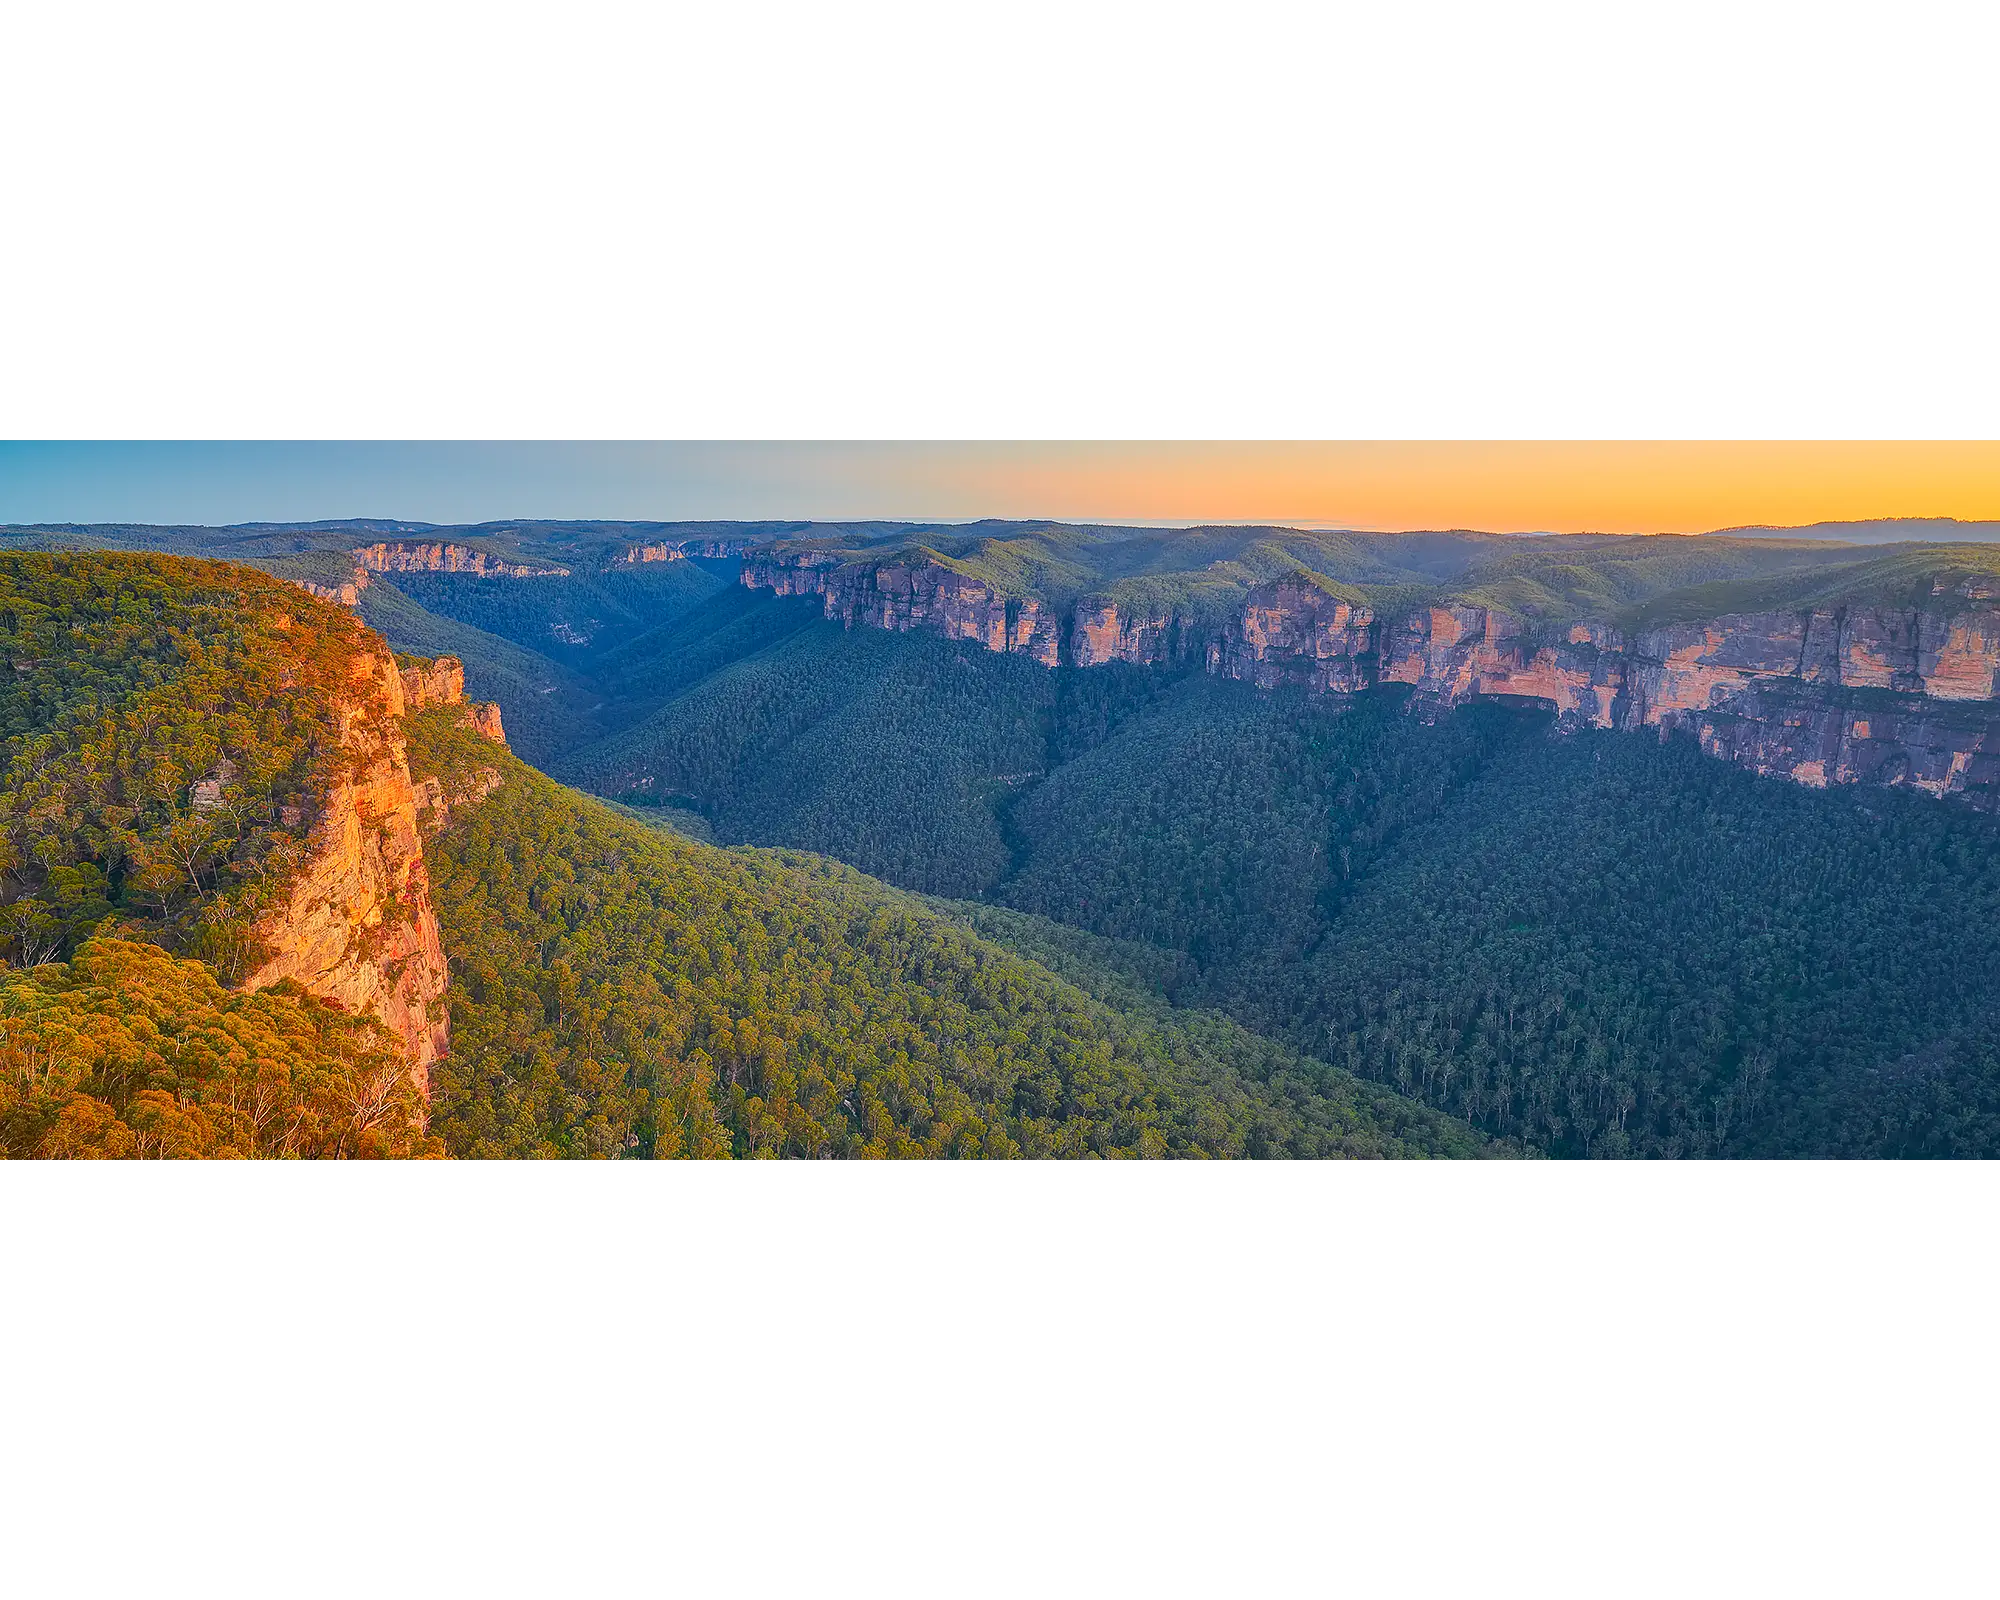 Sunrise over Grose Valley, Blue Mountains National Park, NSW. 